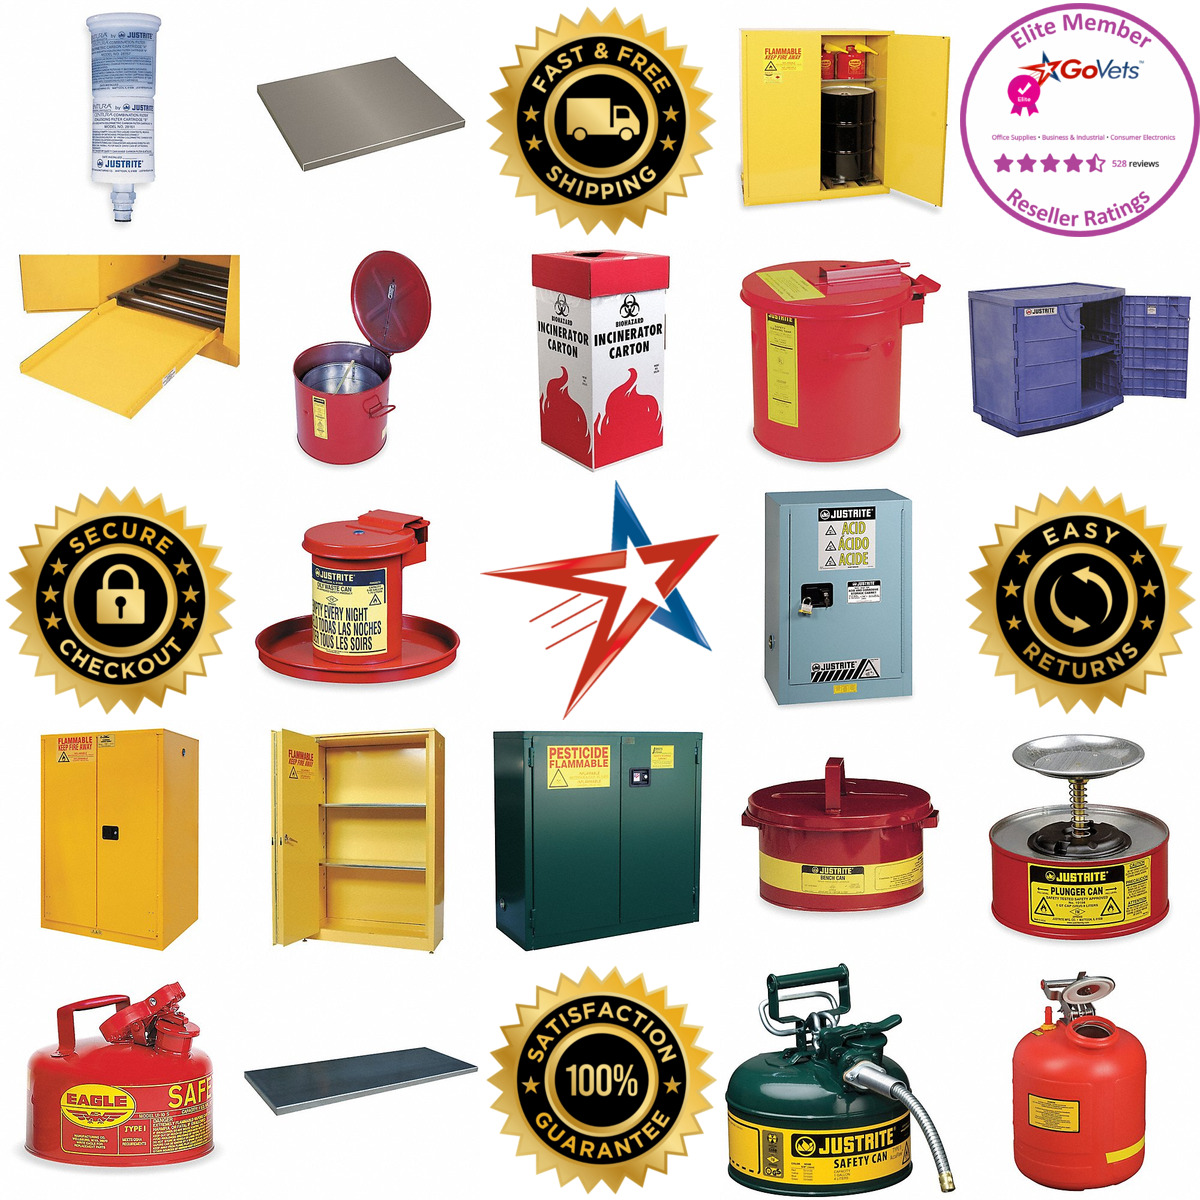 A selection of Safety Storage products on GoVets